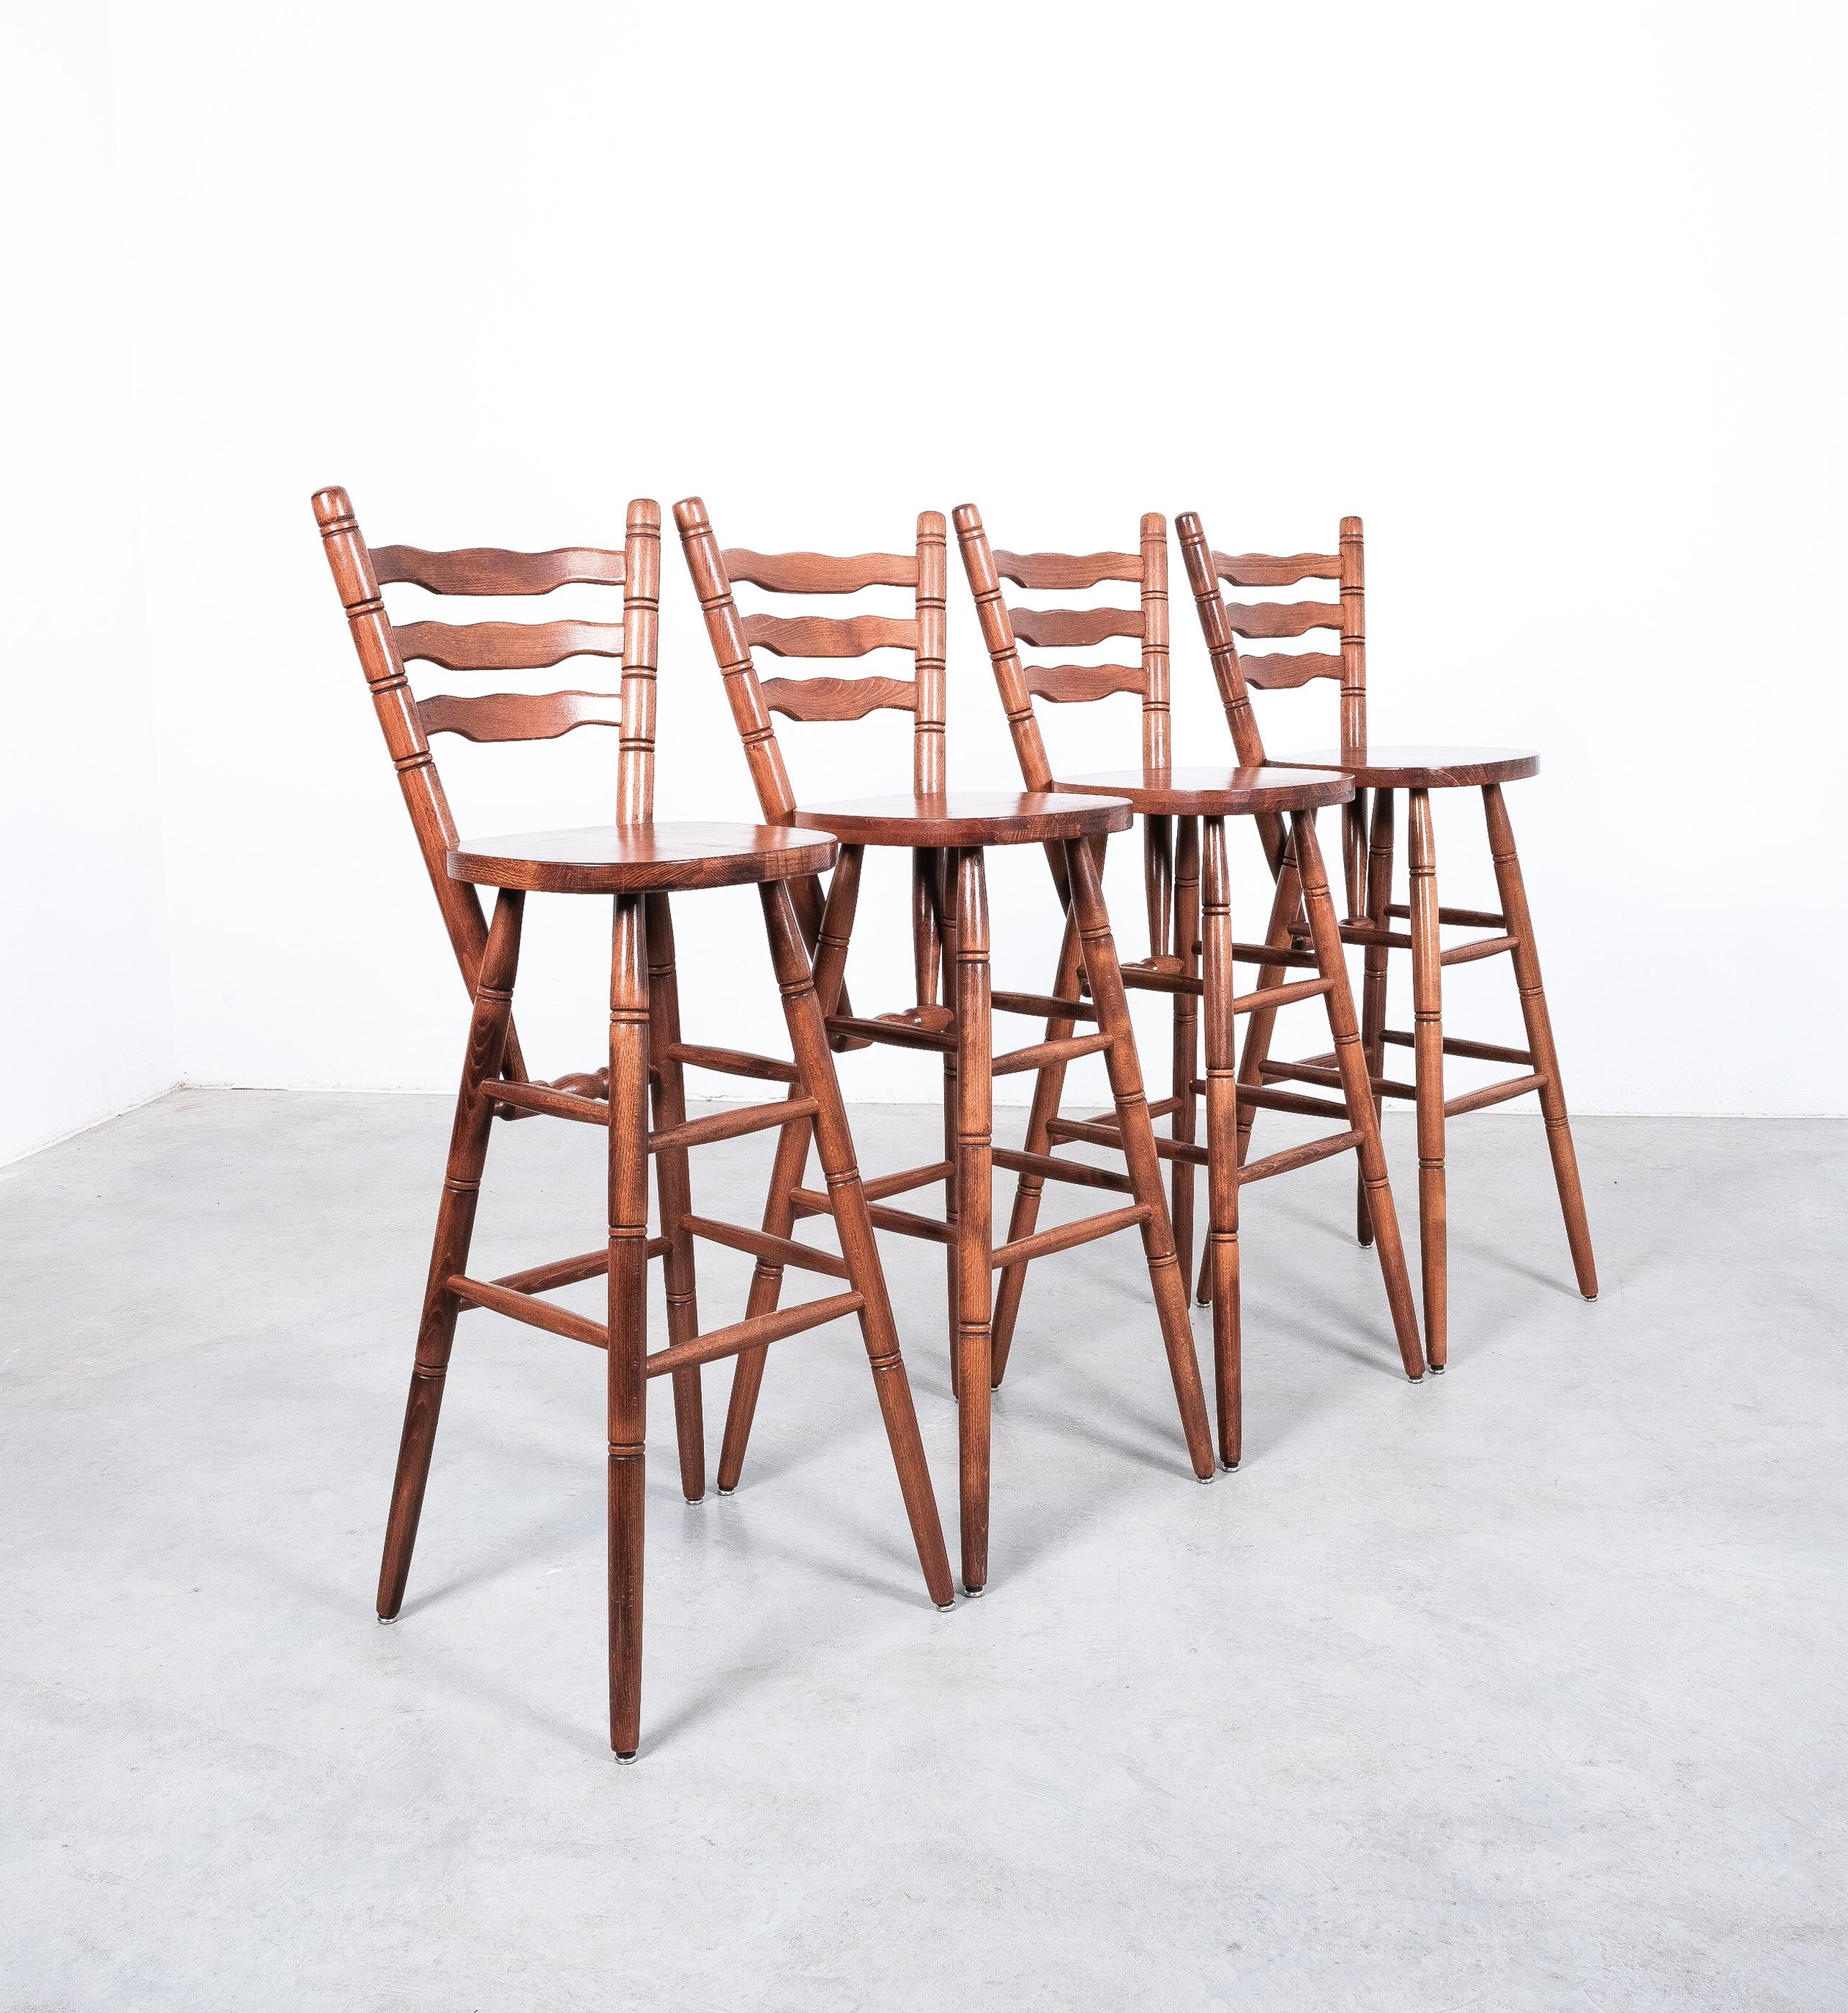 Late 20th Century Rustic Bar Stools Midcentury from Birch Wood, Germany, 1970 For Sale